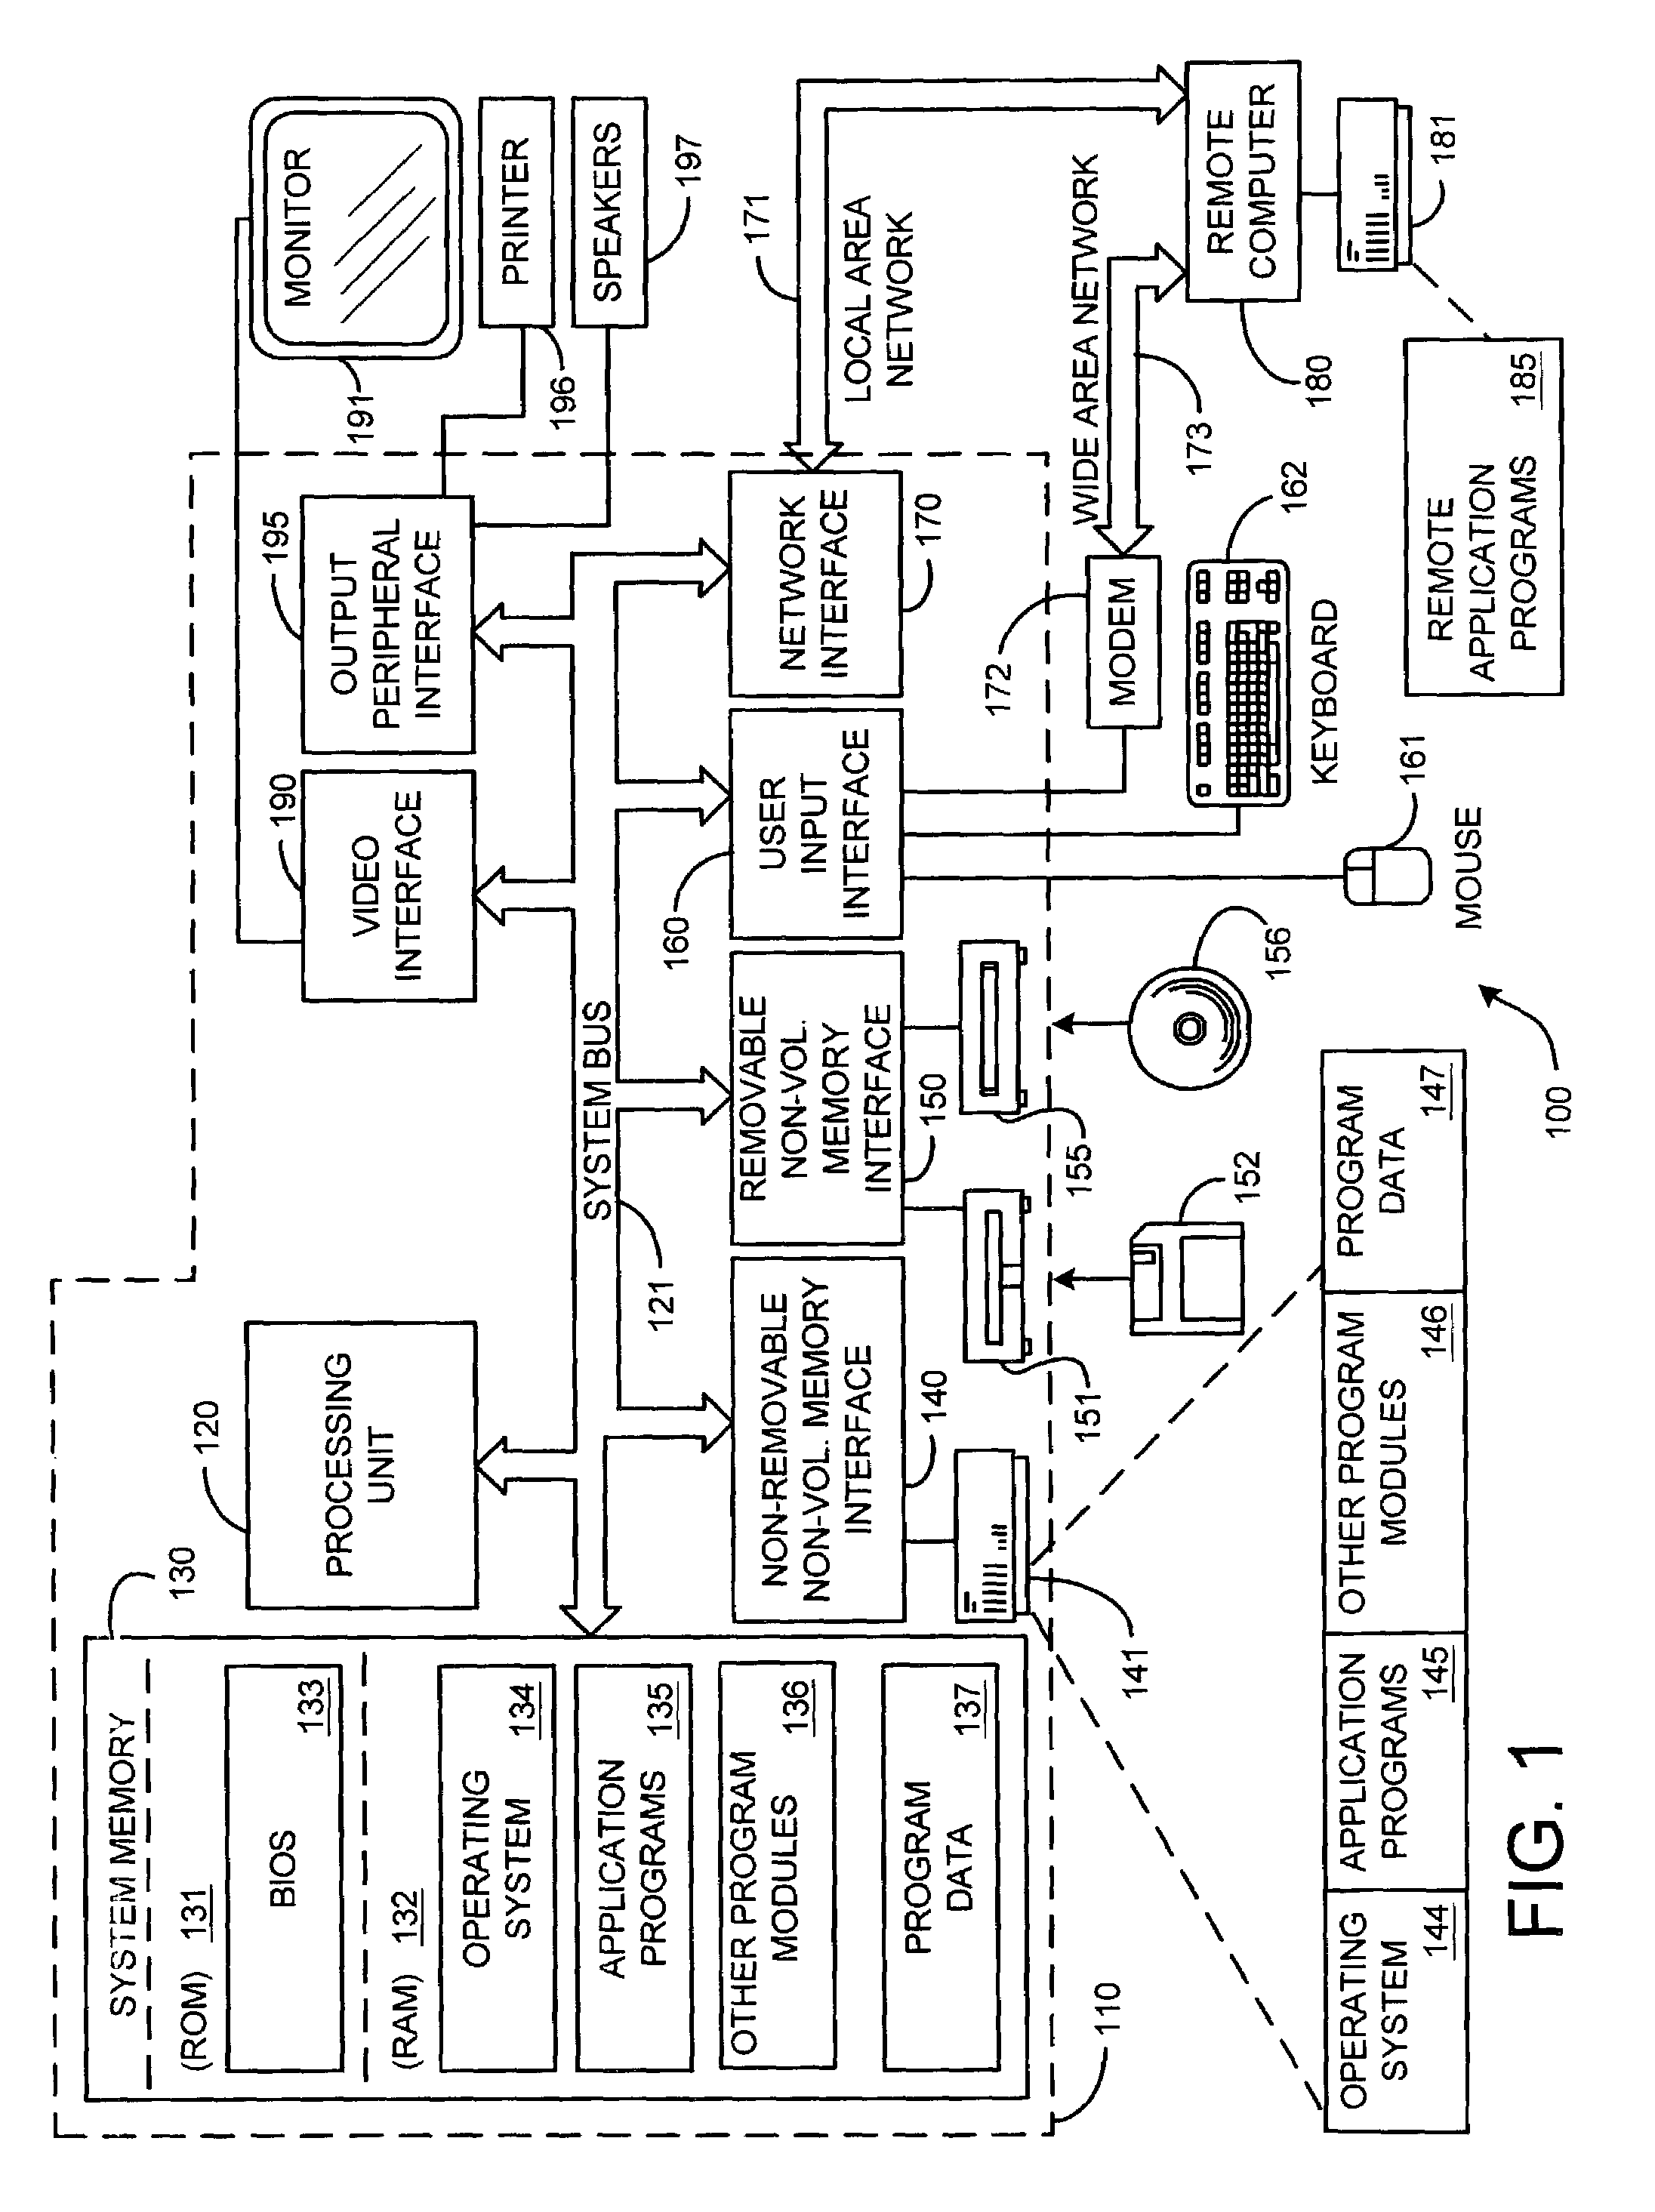 System and method for automatic segmentation and identification of repeating objects from an audio stream